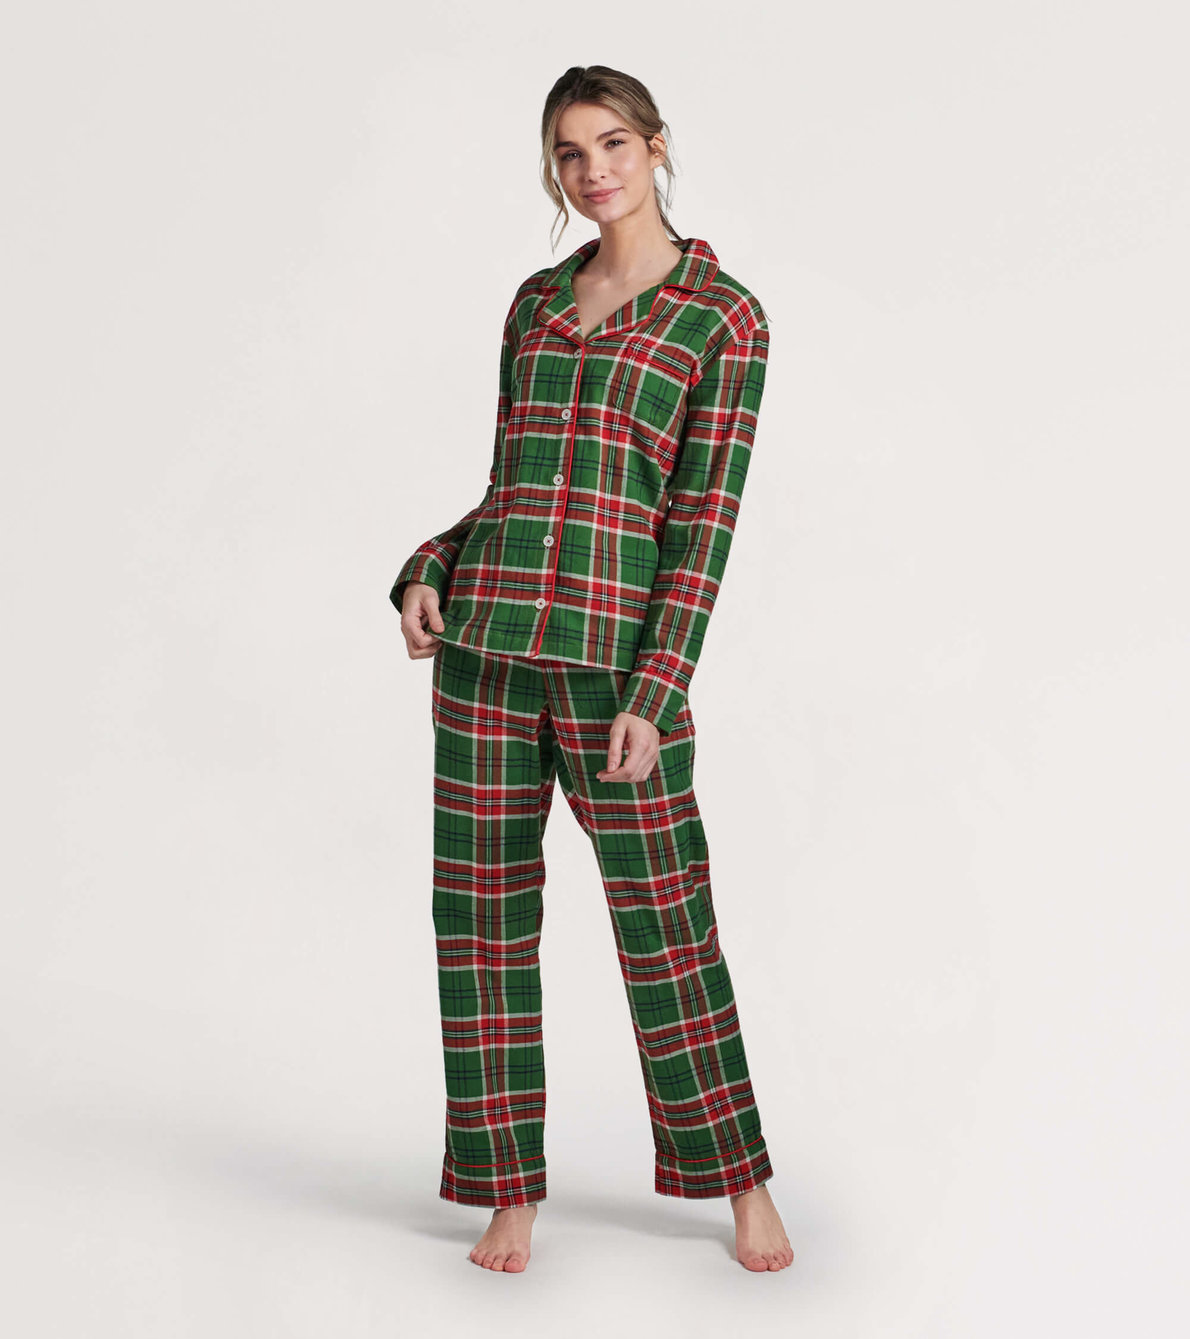 View larger image of Women's Country Christmas Plaid Flannel Pajama Set